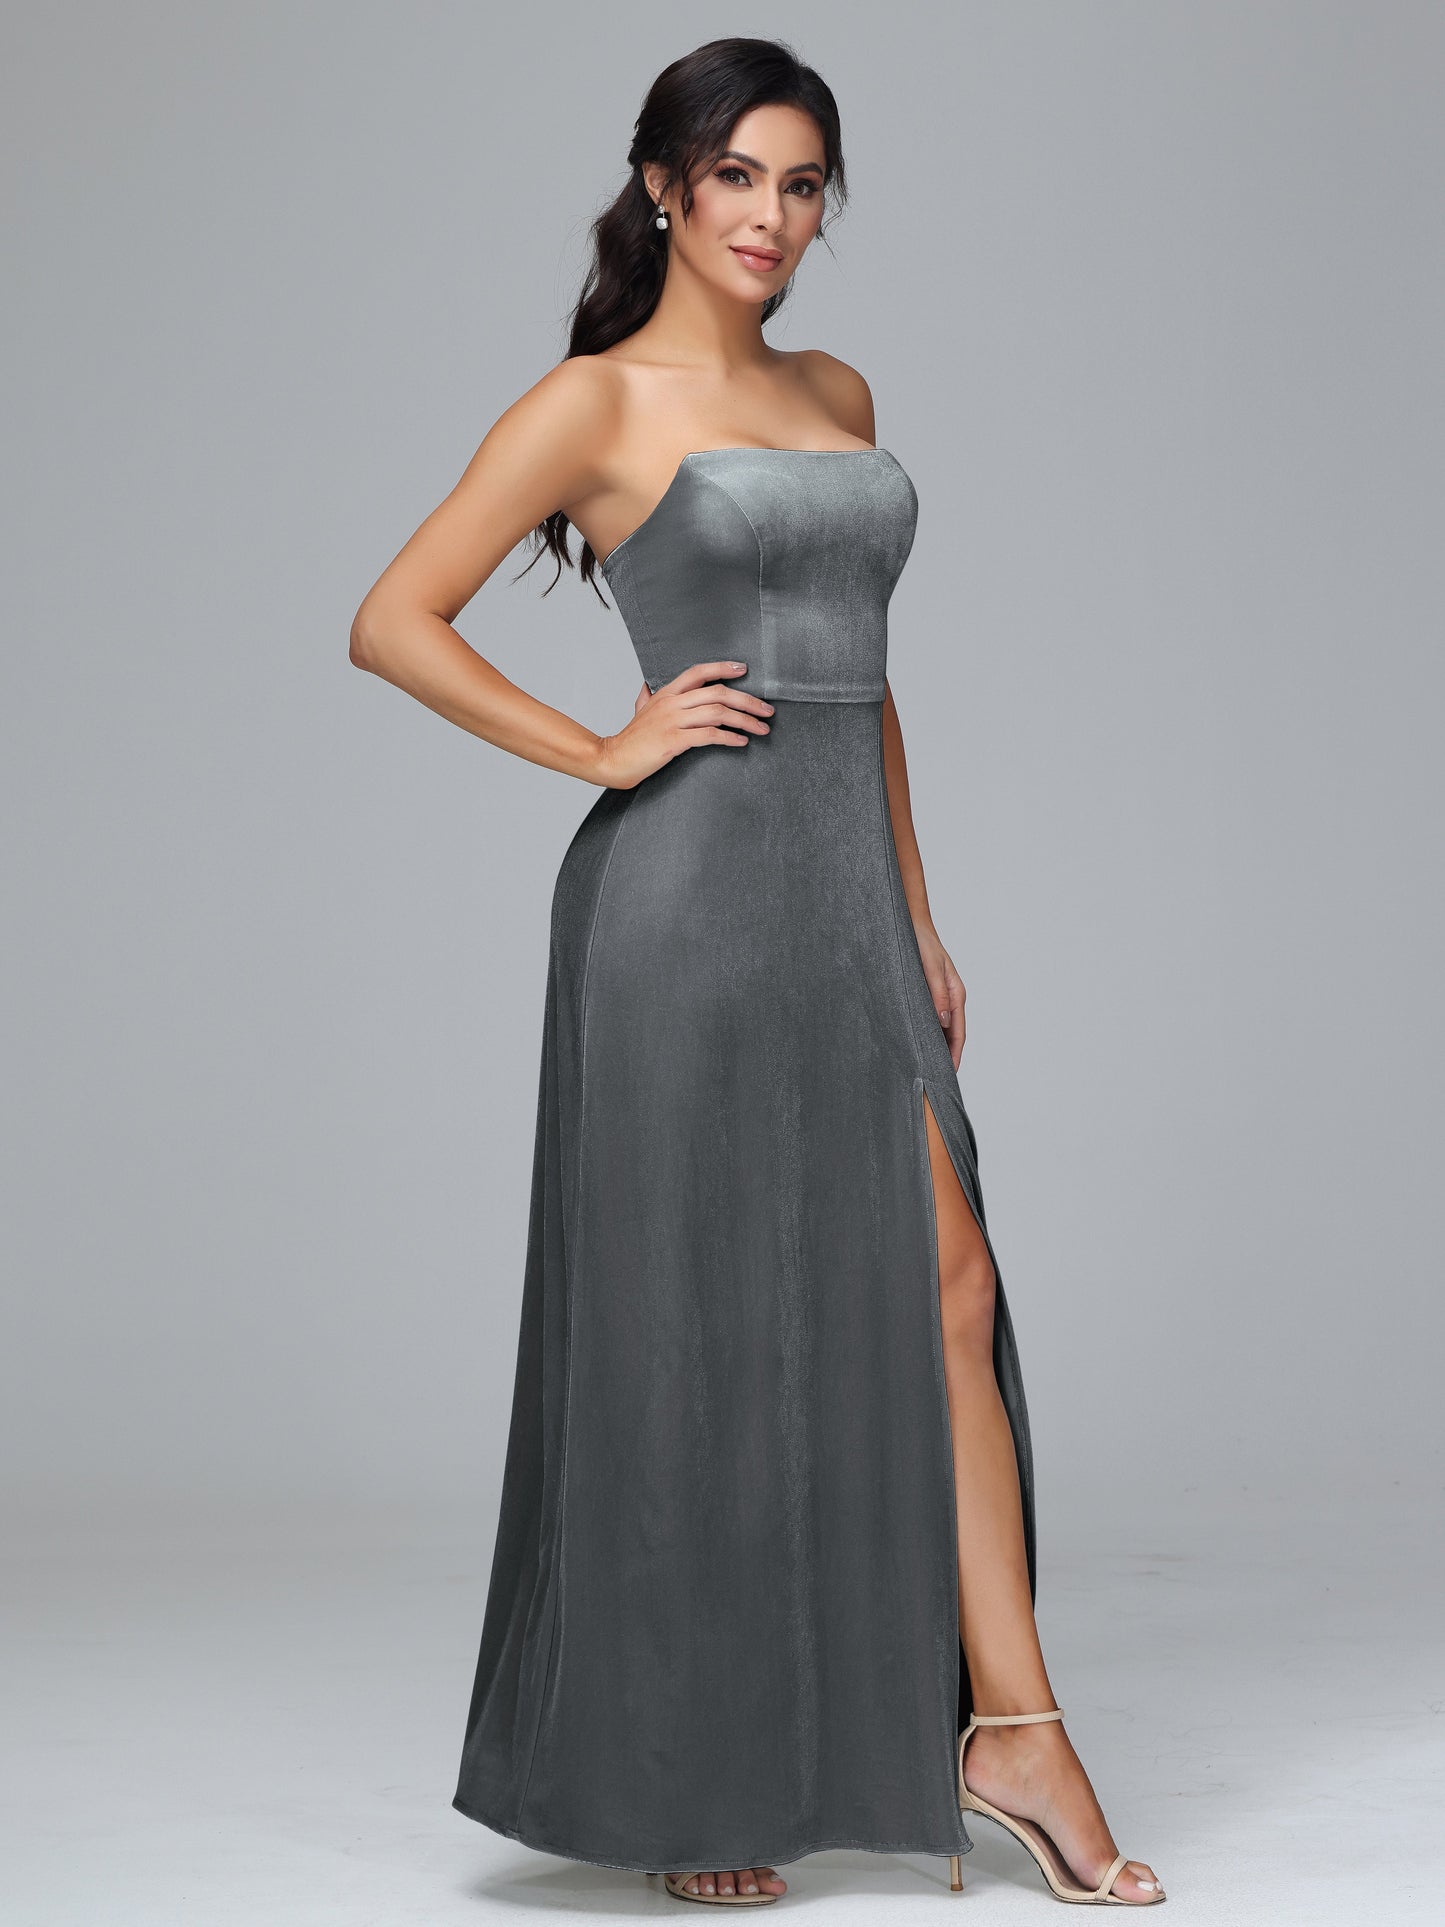 Strapless Backless Plus Size Bridesmaid Dresses